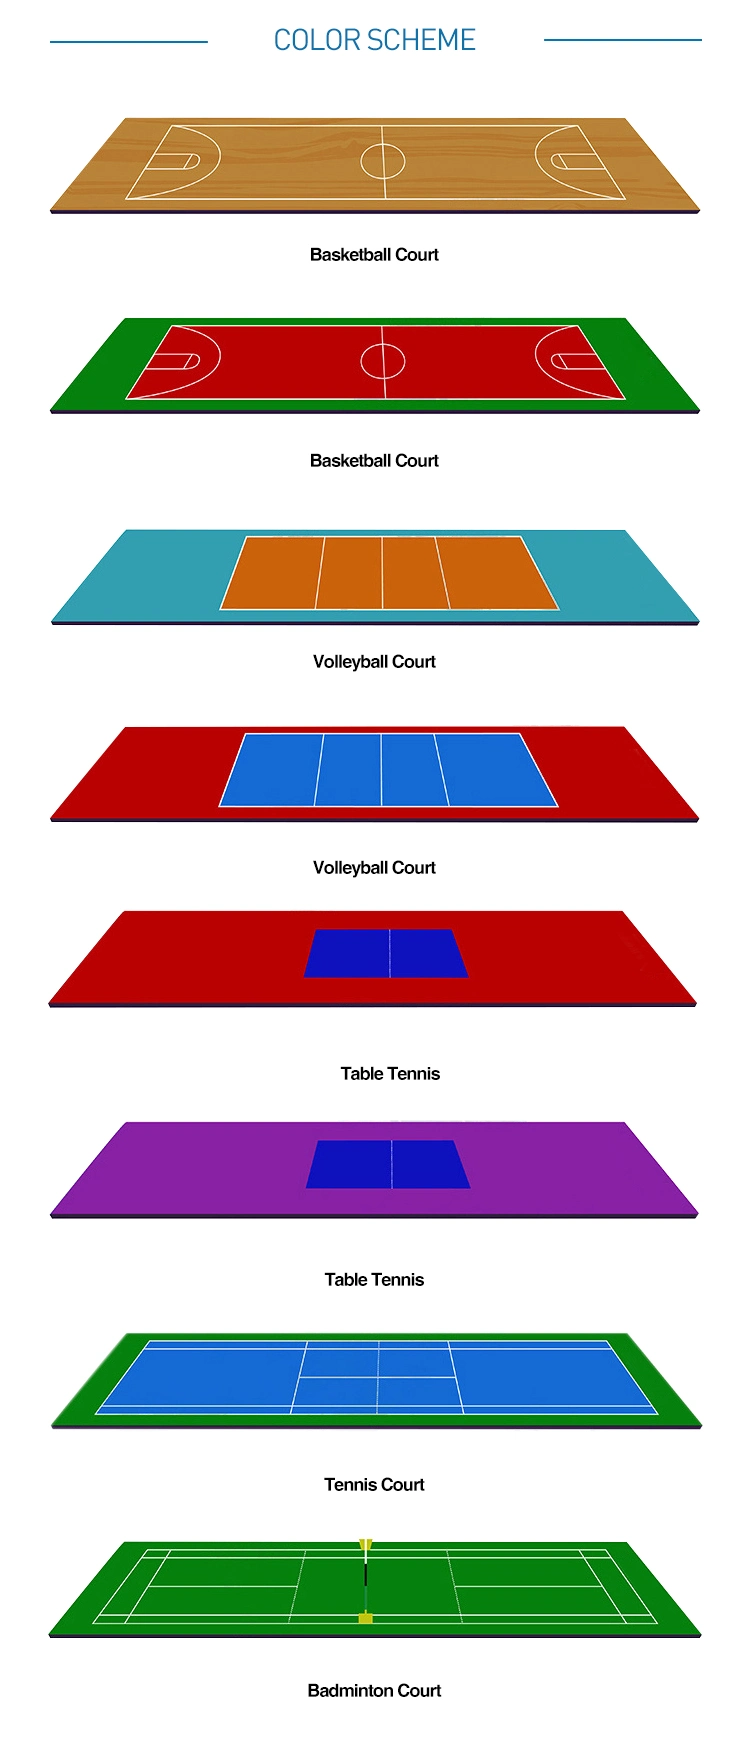 Basketball Court Flooring Cost with High Rebound Performance